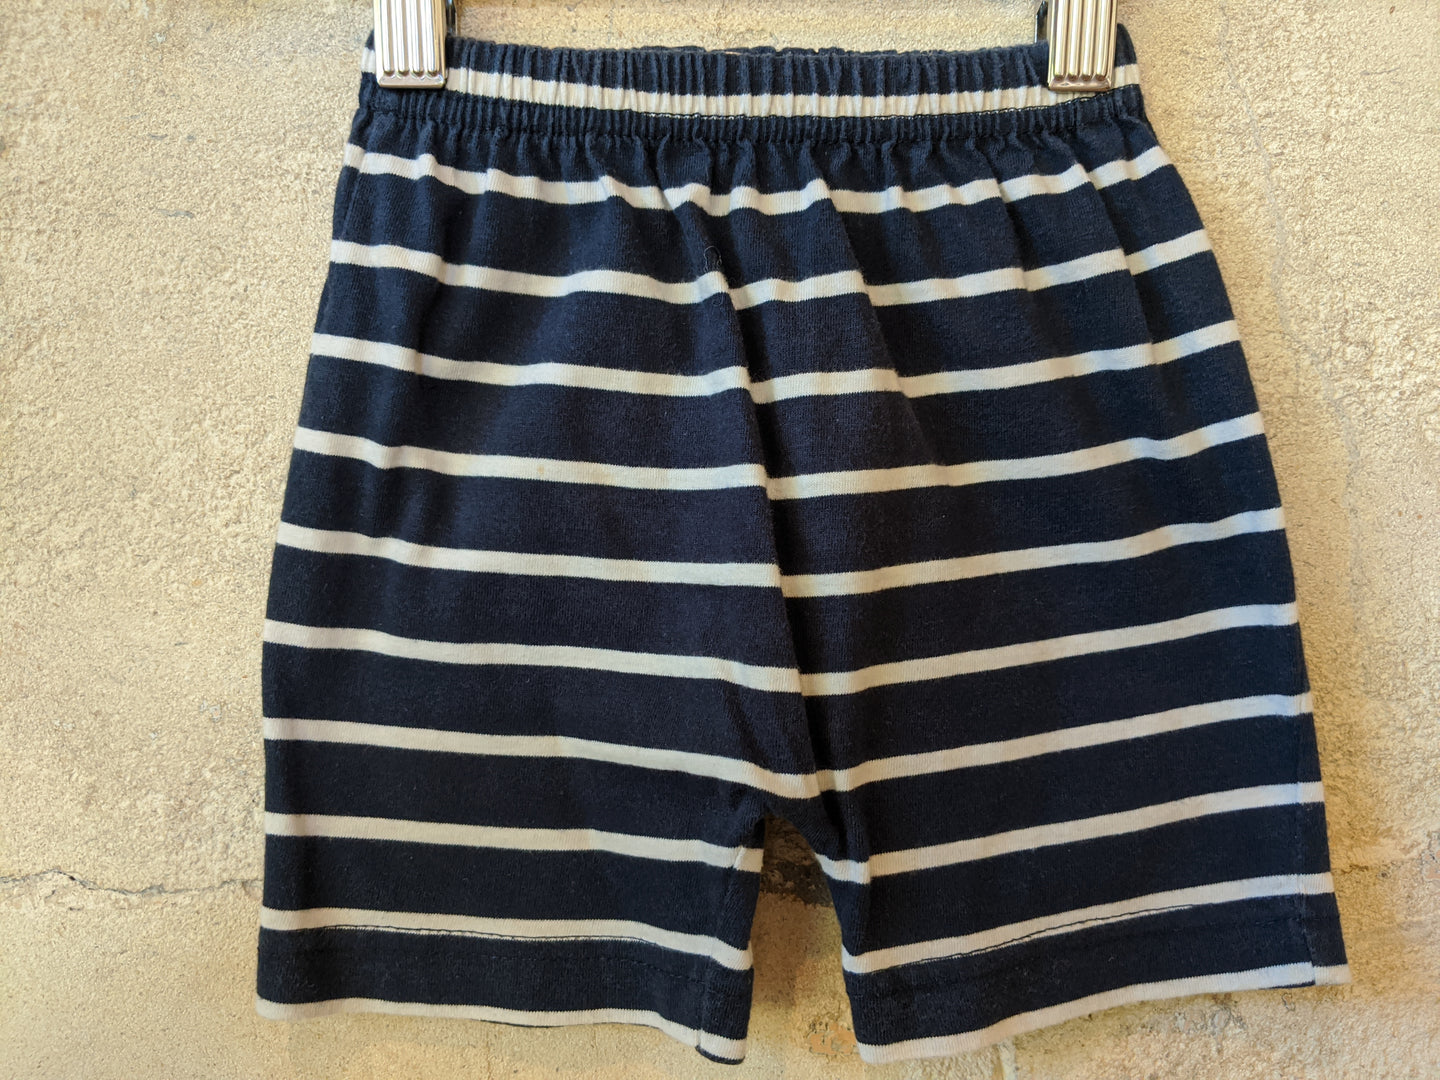 Great Soft Striped Navy Shorts 12 Months